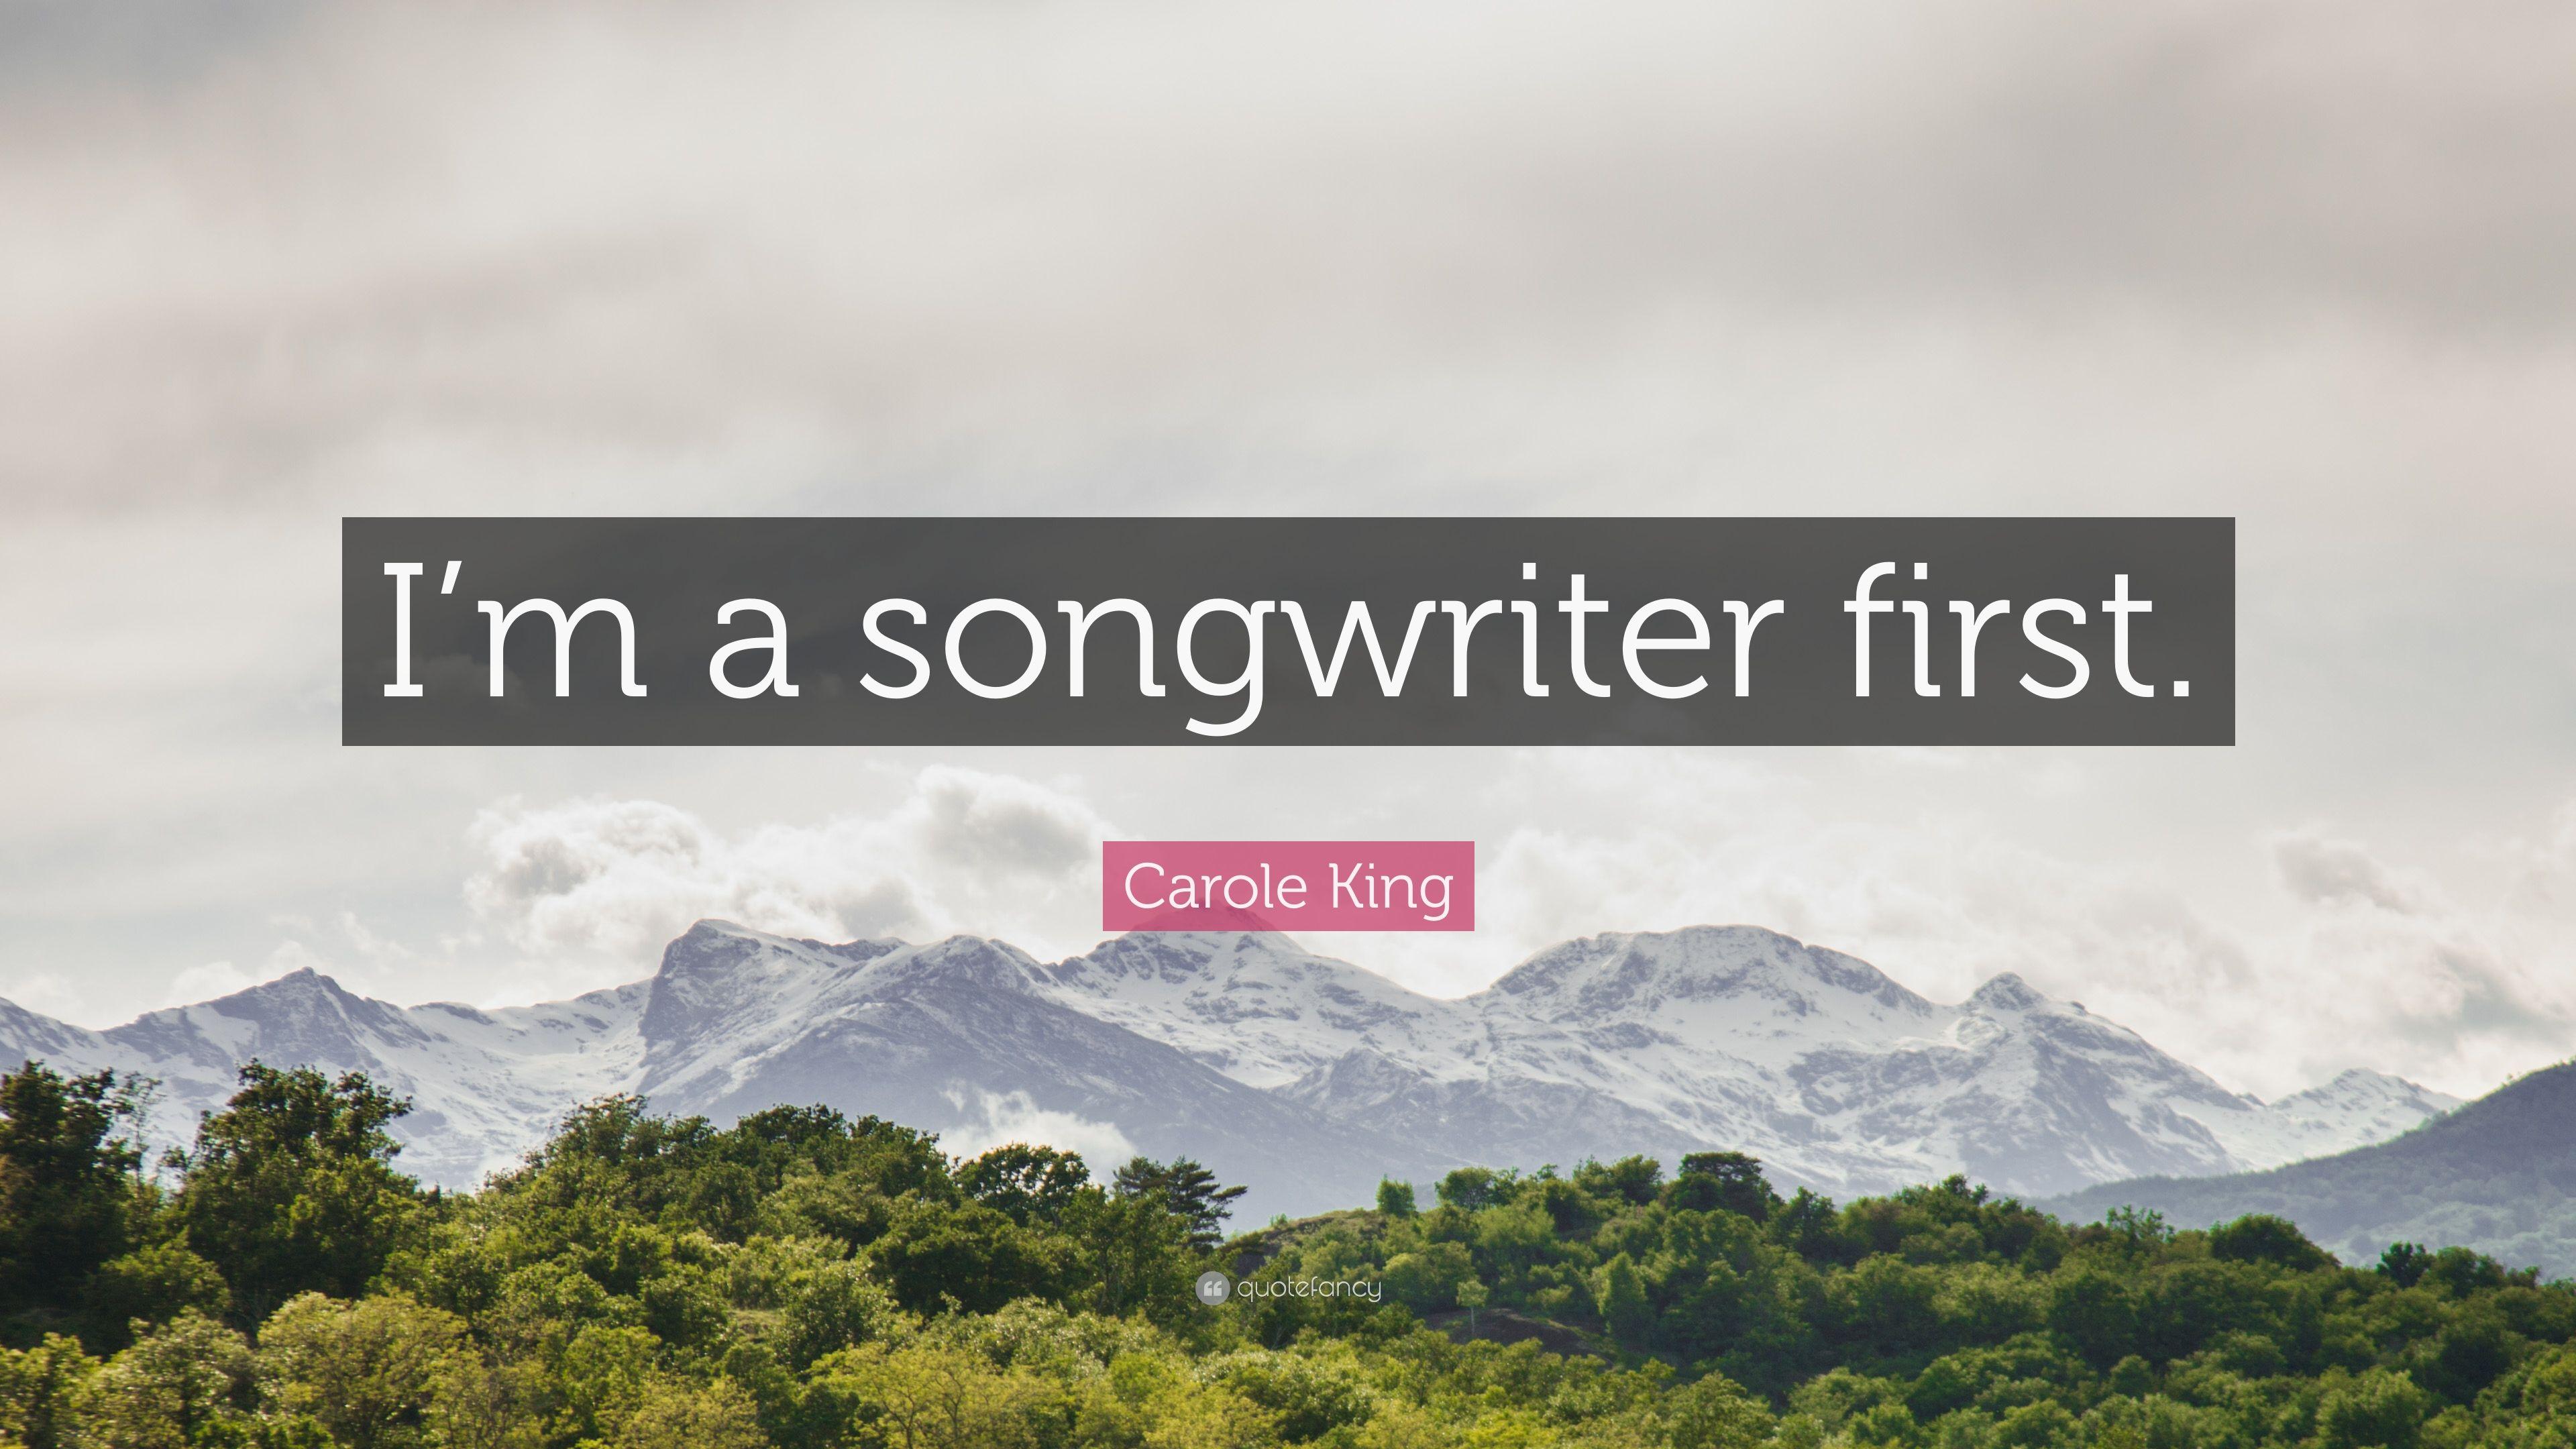 Carole King Quote: “I'm a songwriter first.” (7 wallpaper)